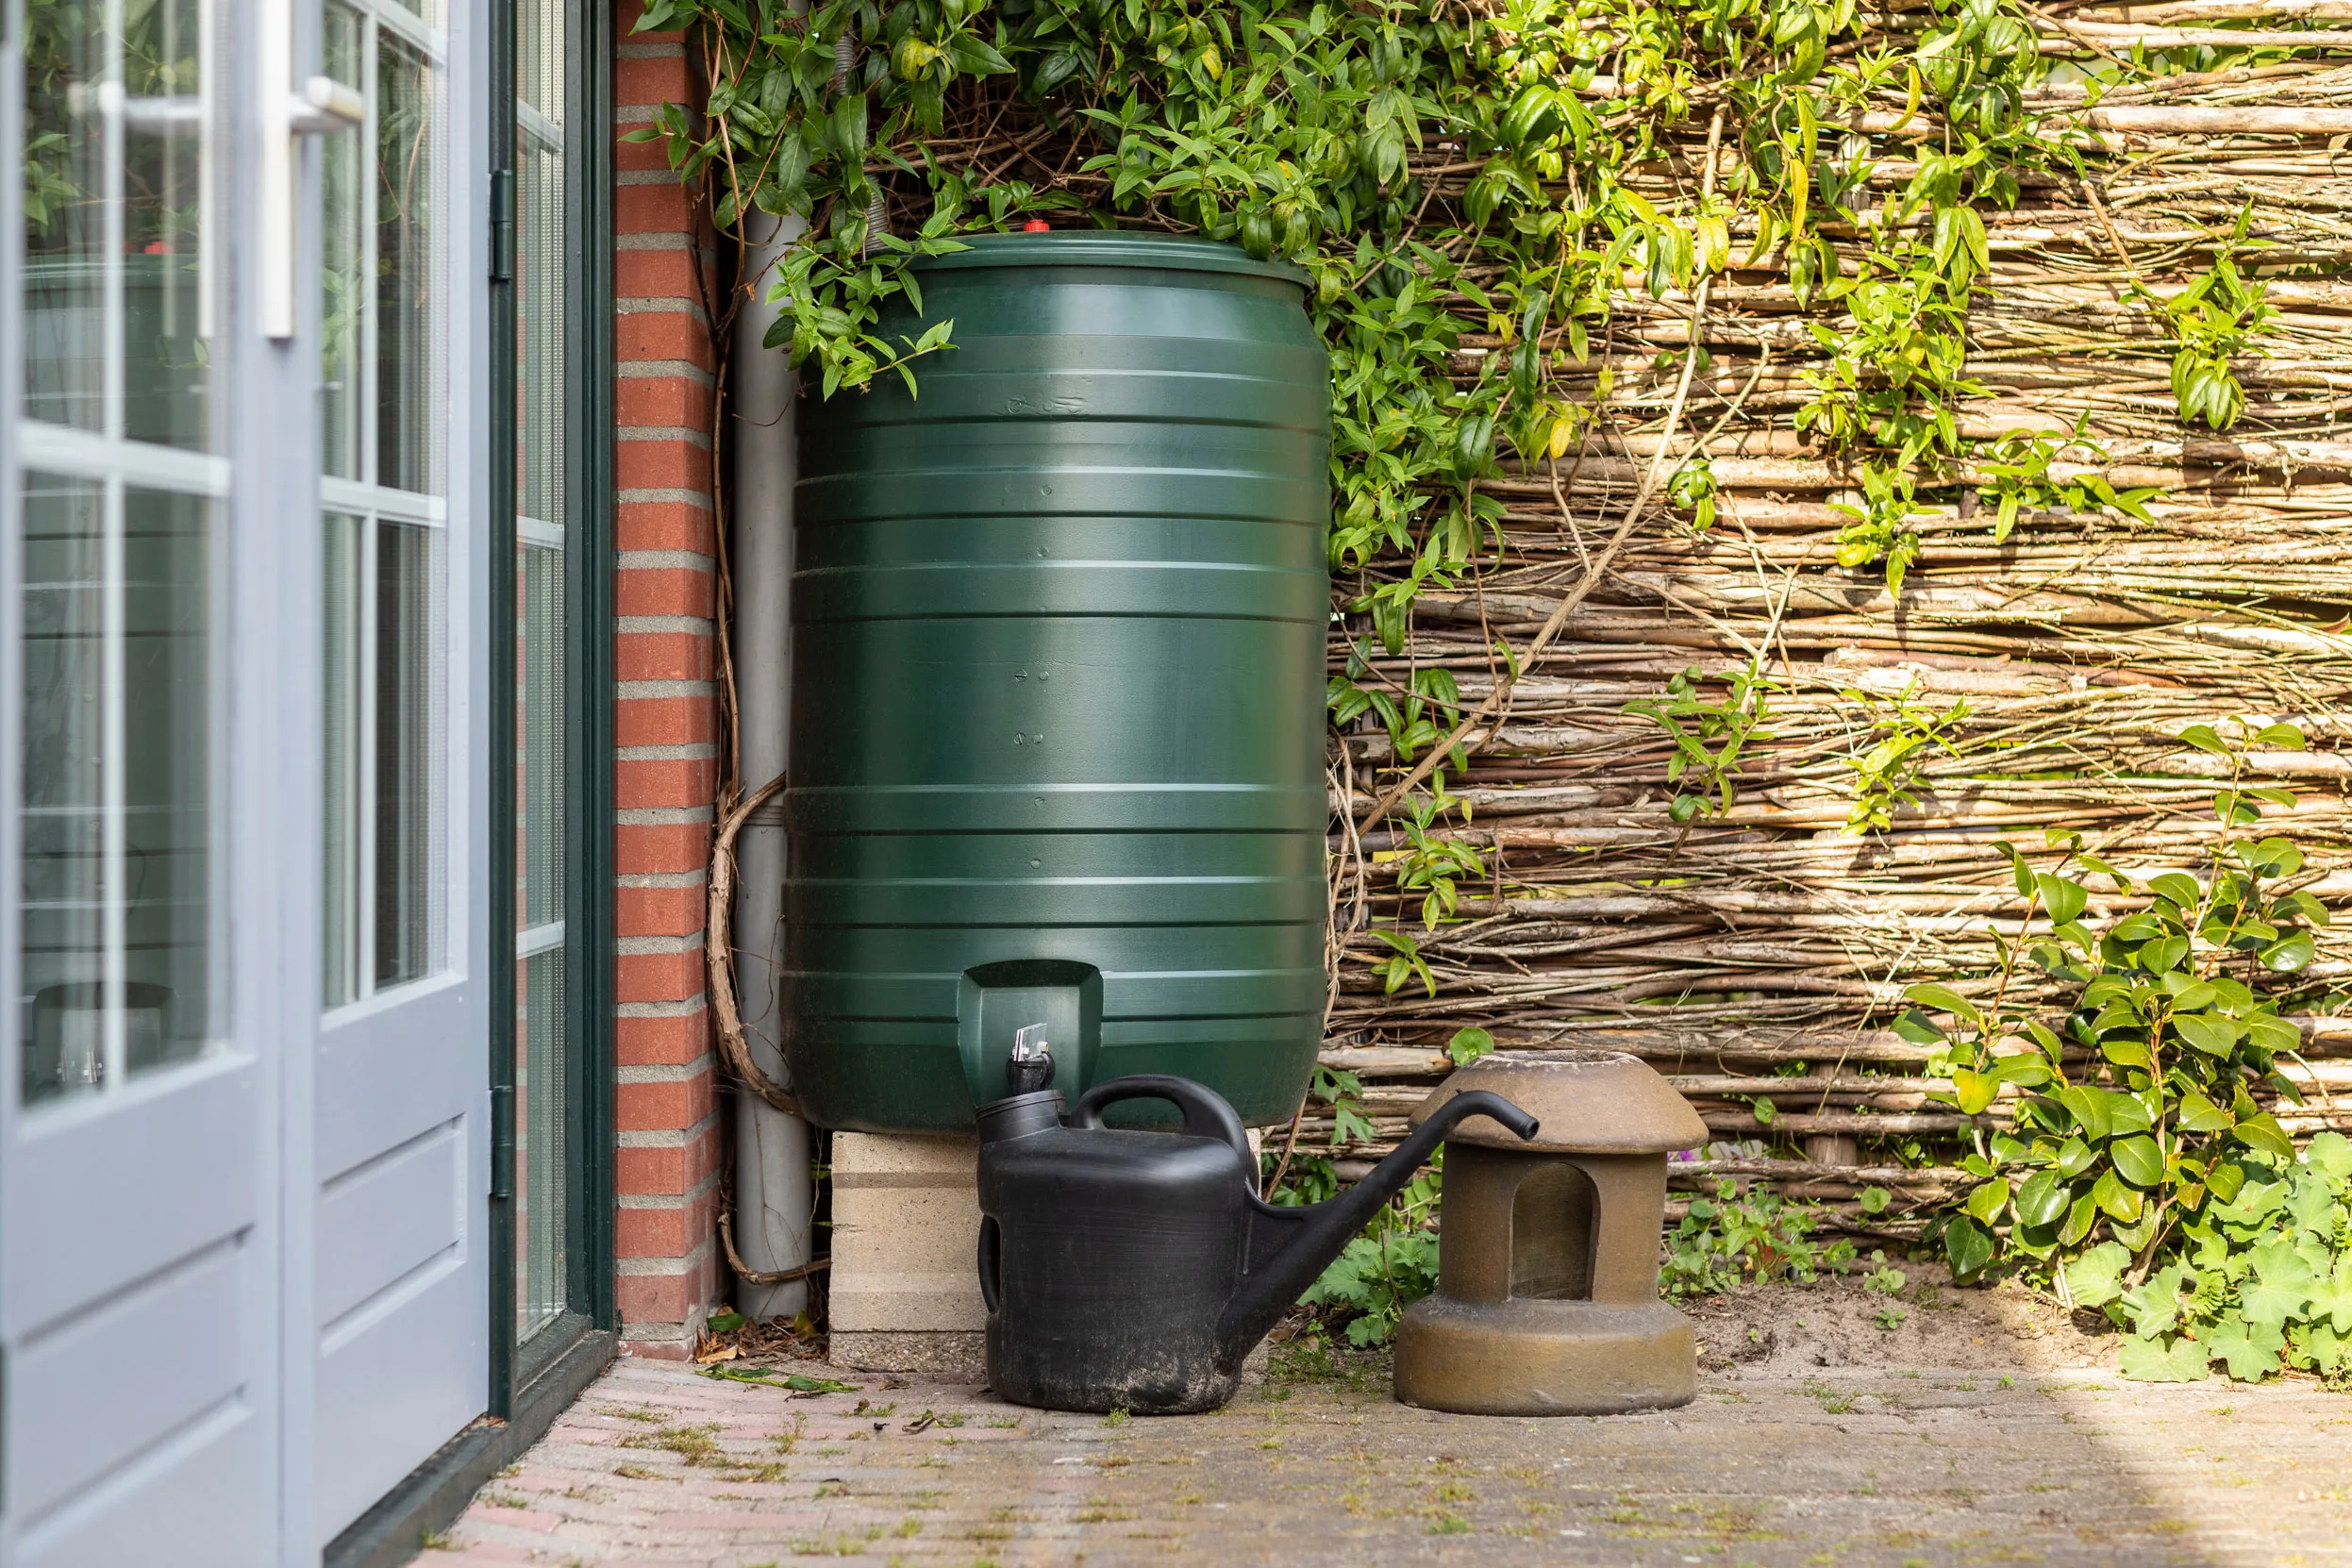 A watering can being filled from a plastic water butt, sitting on the corner of a patio against a wicker fence and brick wall.